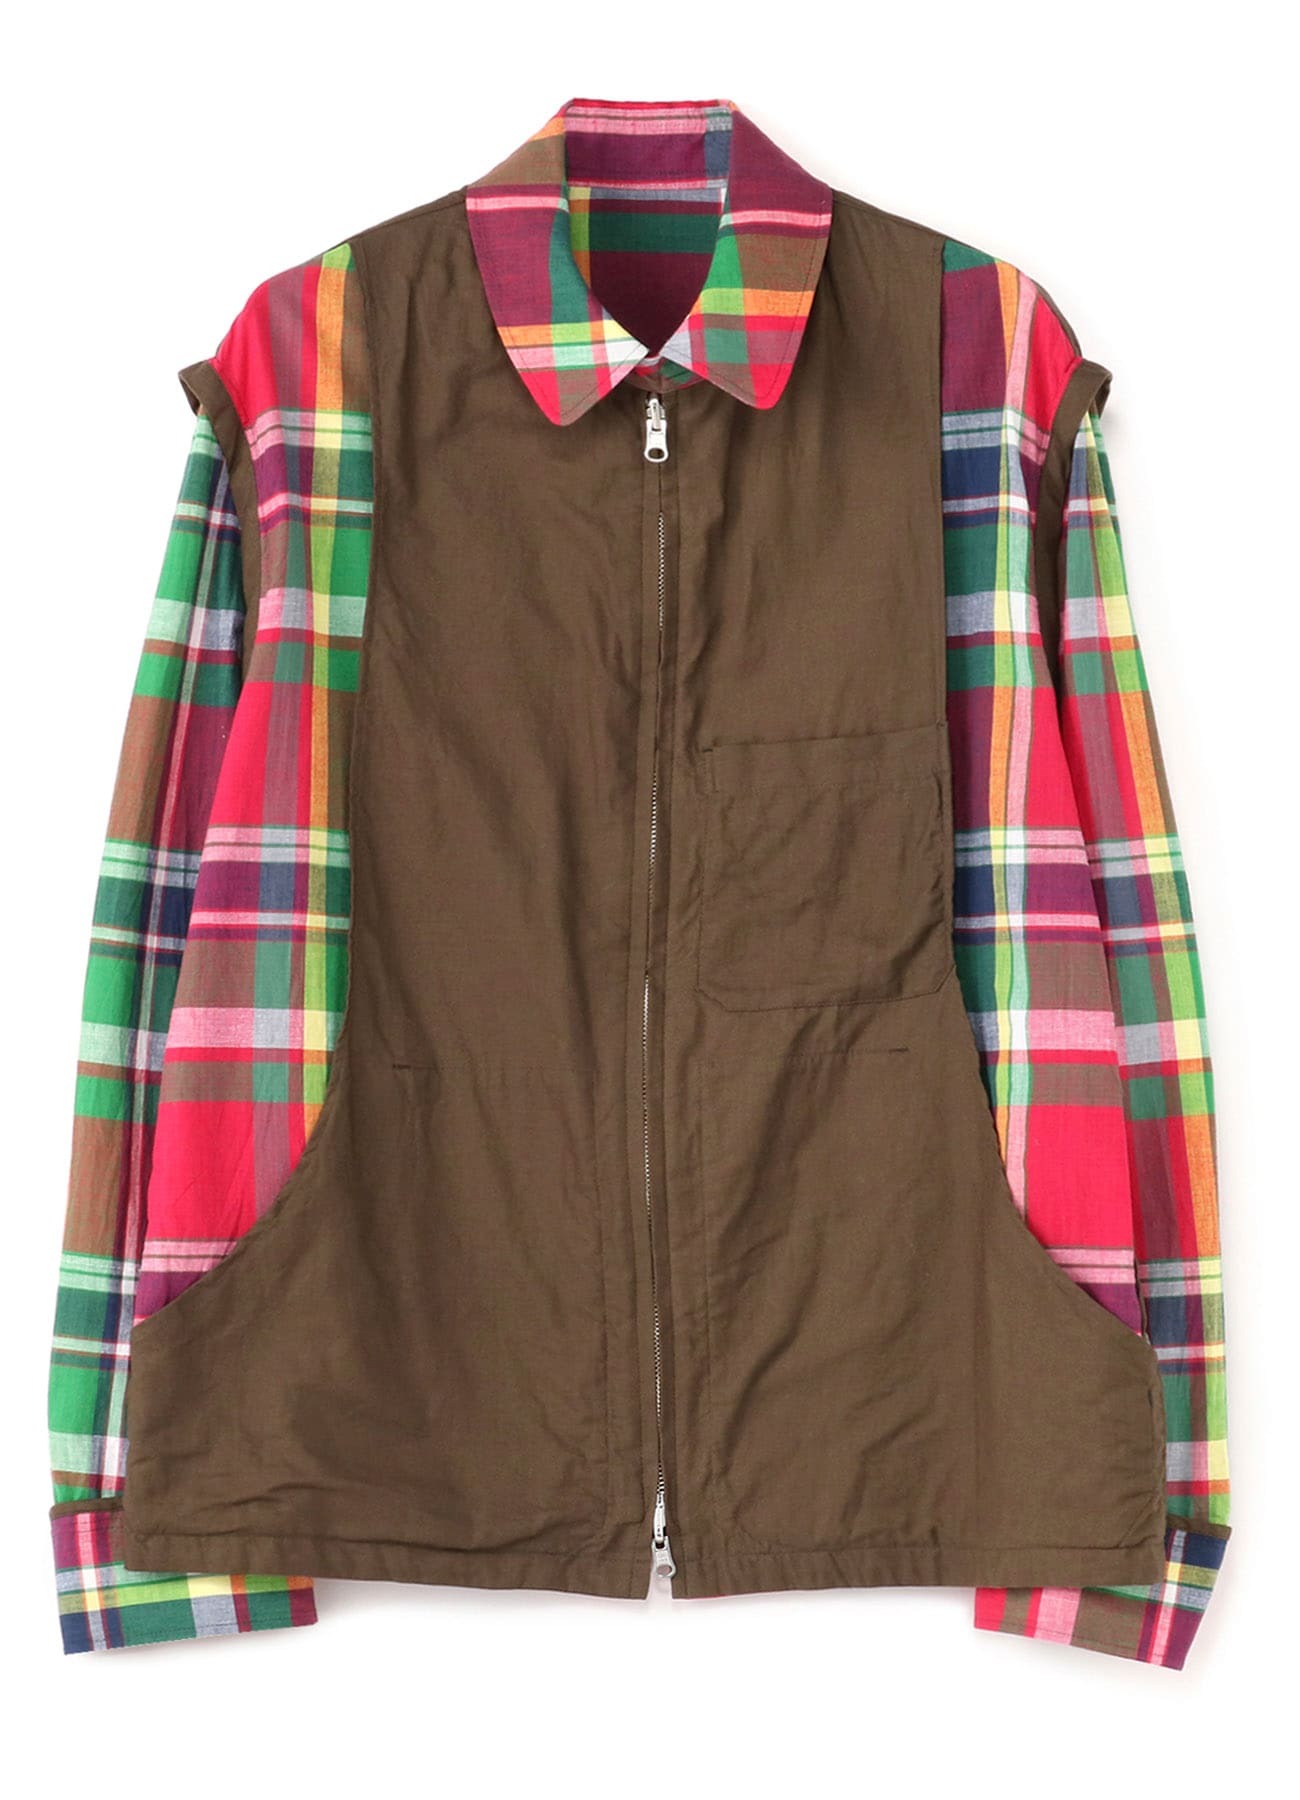 No.69 Madras Check Red Green Work Blouson(FREE SIZE red): Vintage